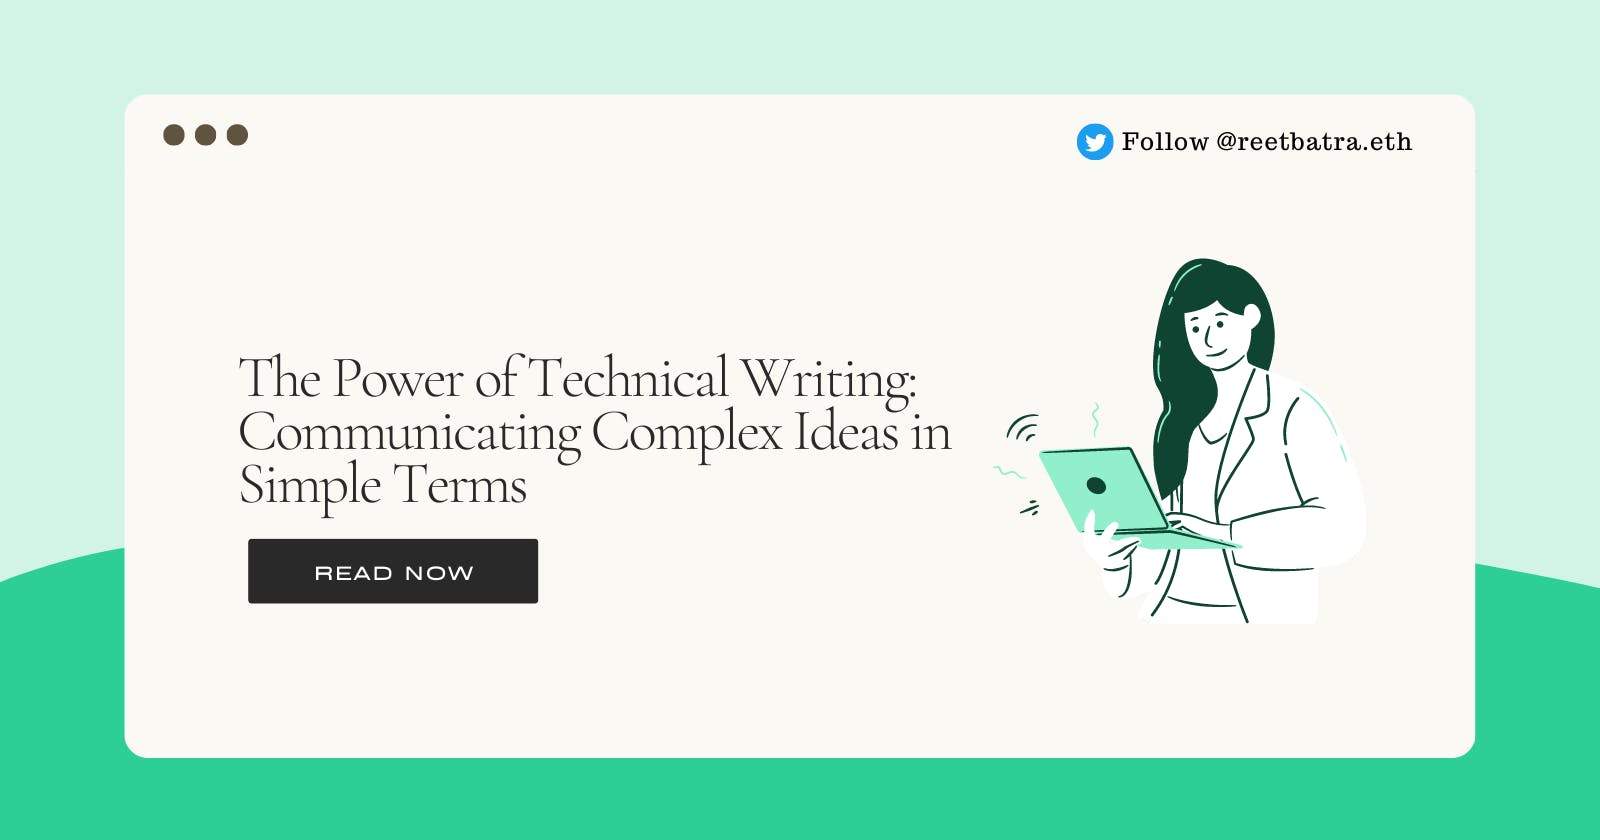 The Power of Technical Writing: Communicating Complex Ideas in Simple Terms